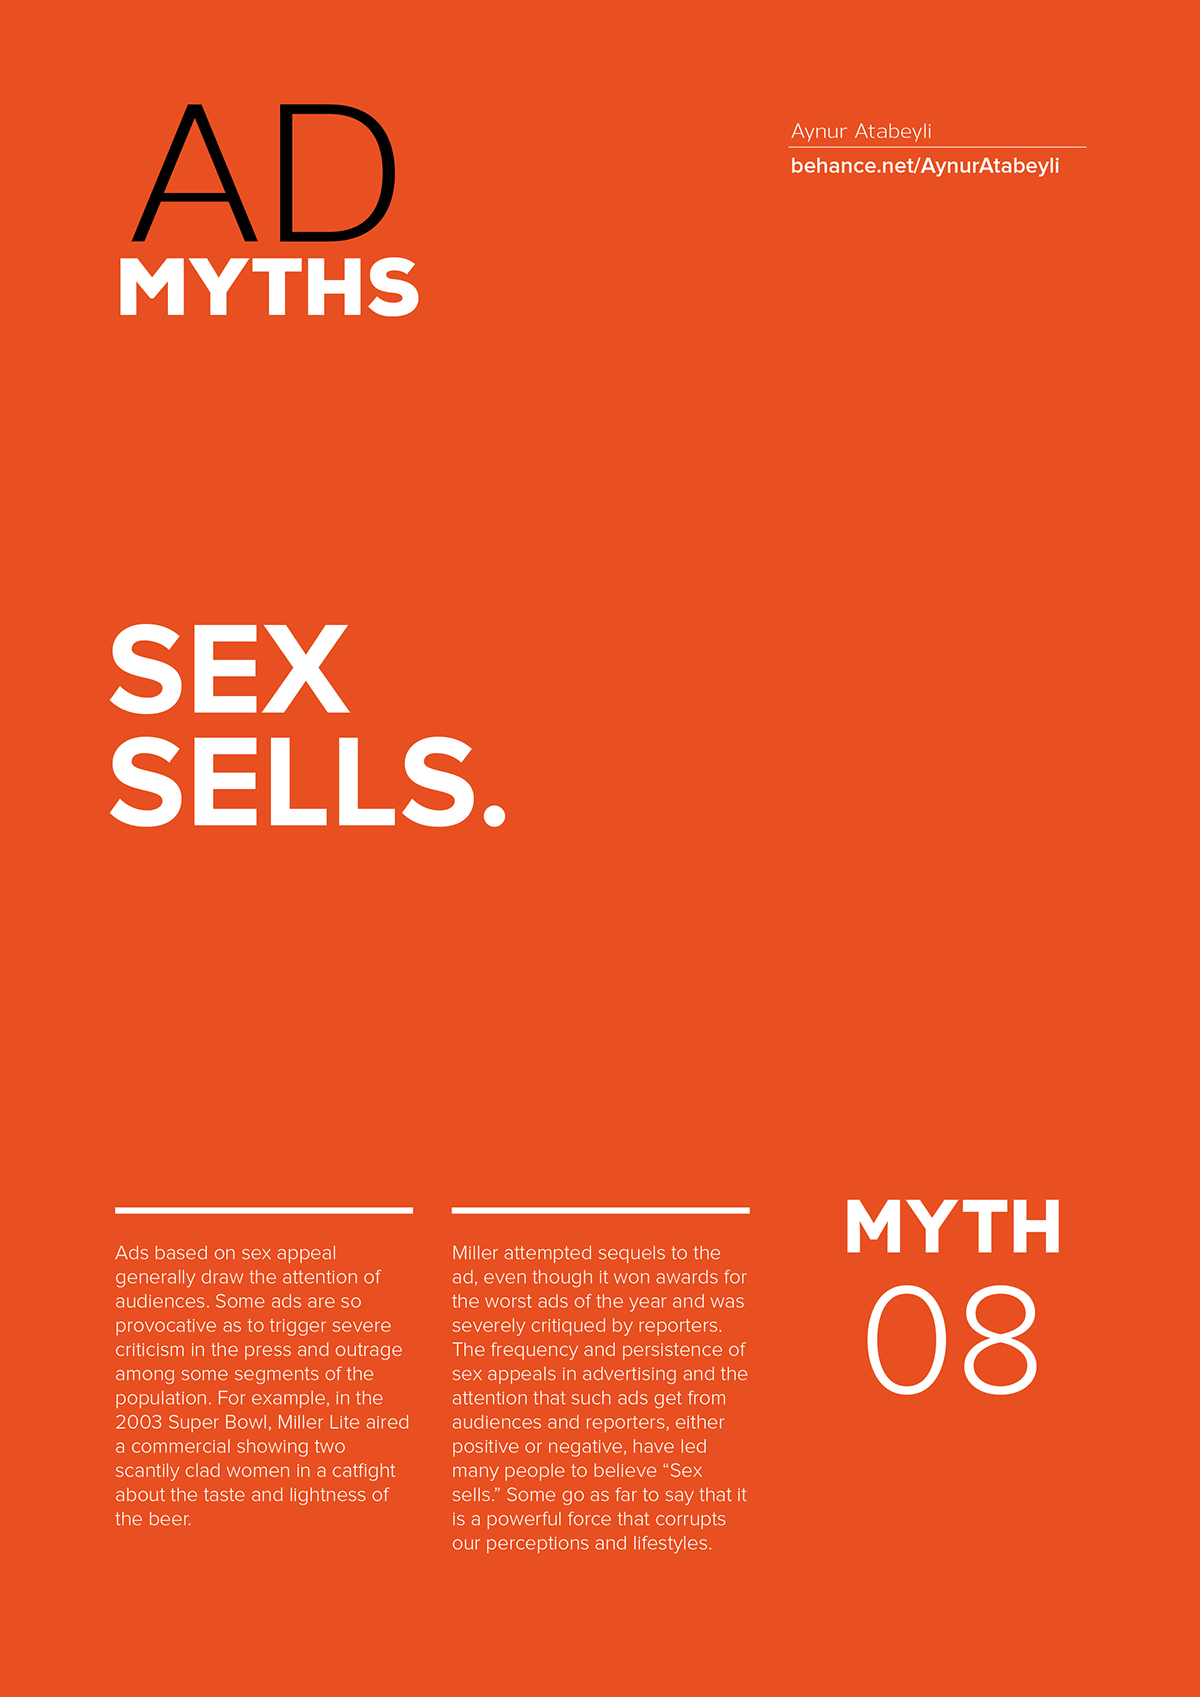 Advertising  myths posters design Illustrator theory ads